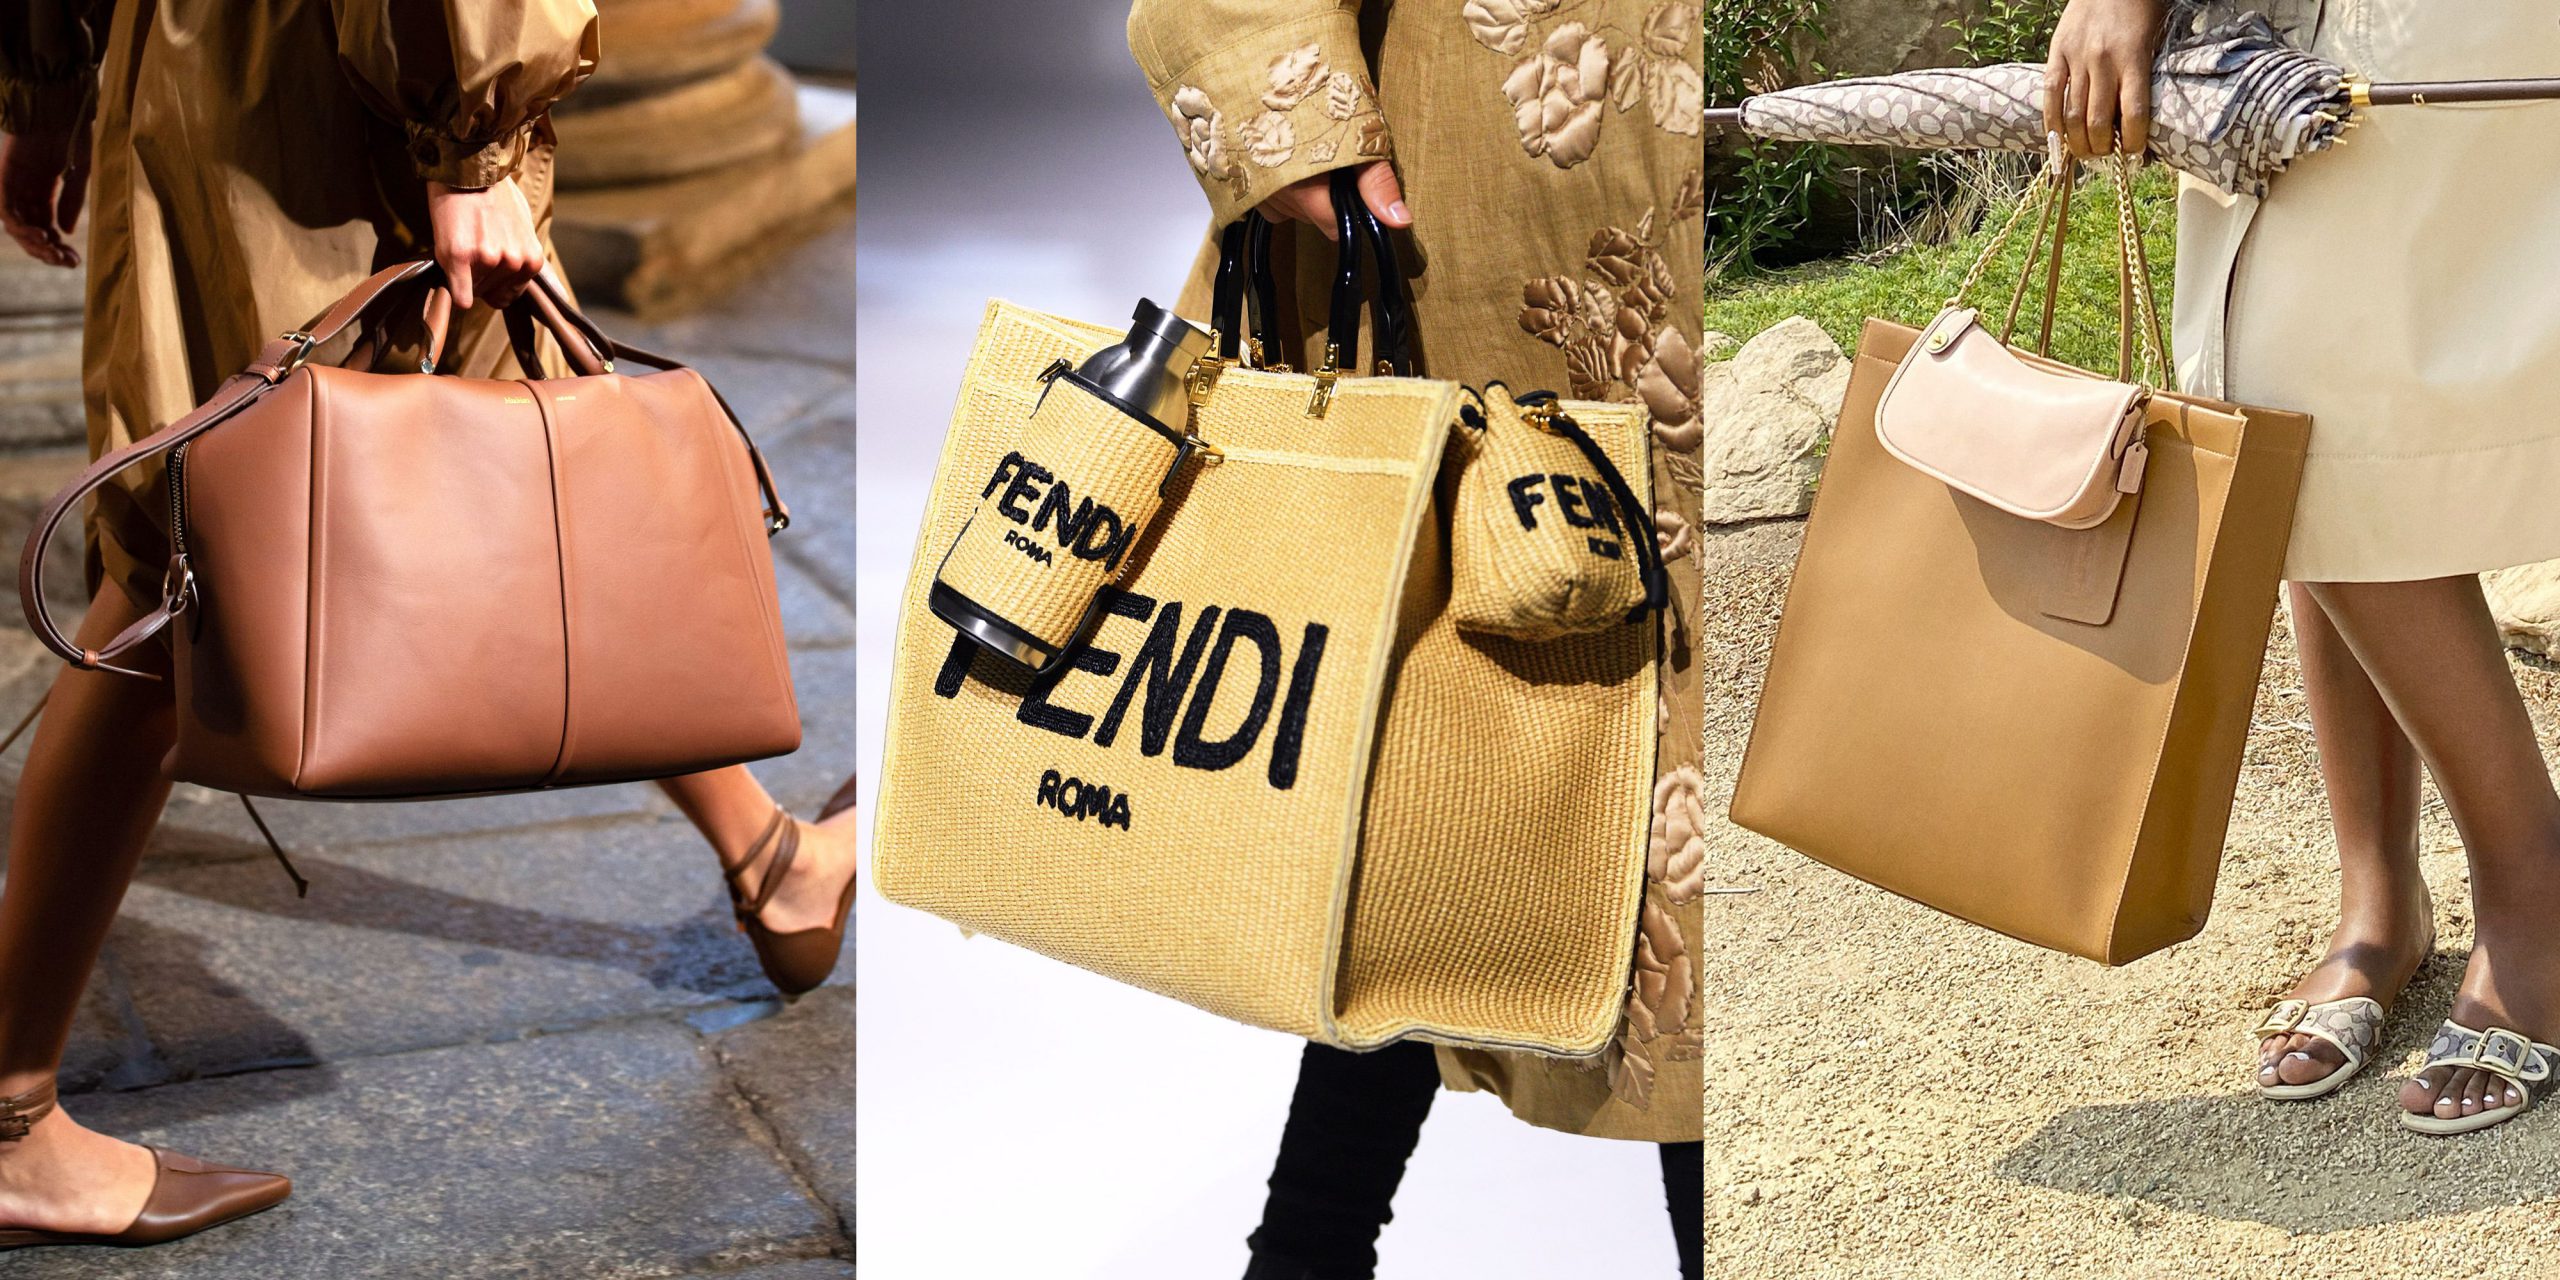 5 beautiful must-have handbags designs for the upcoming fall